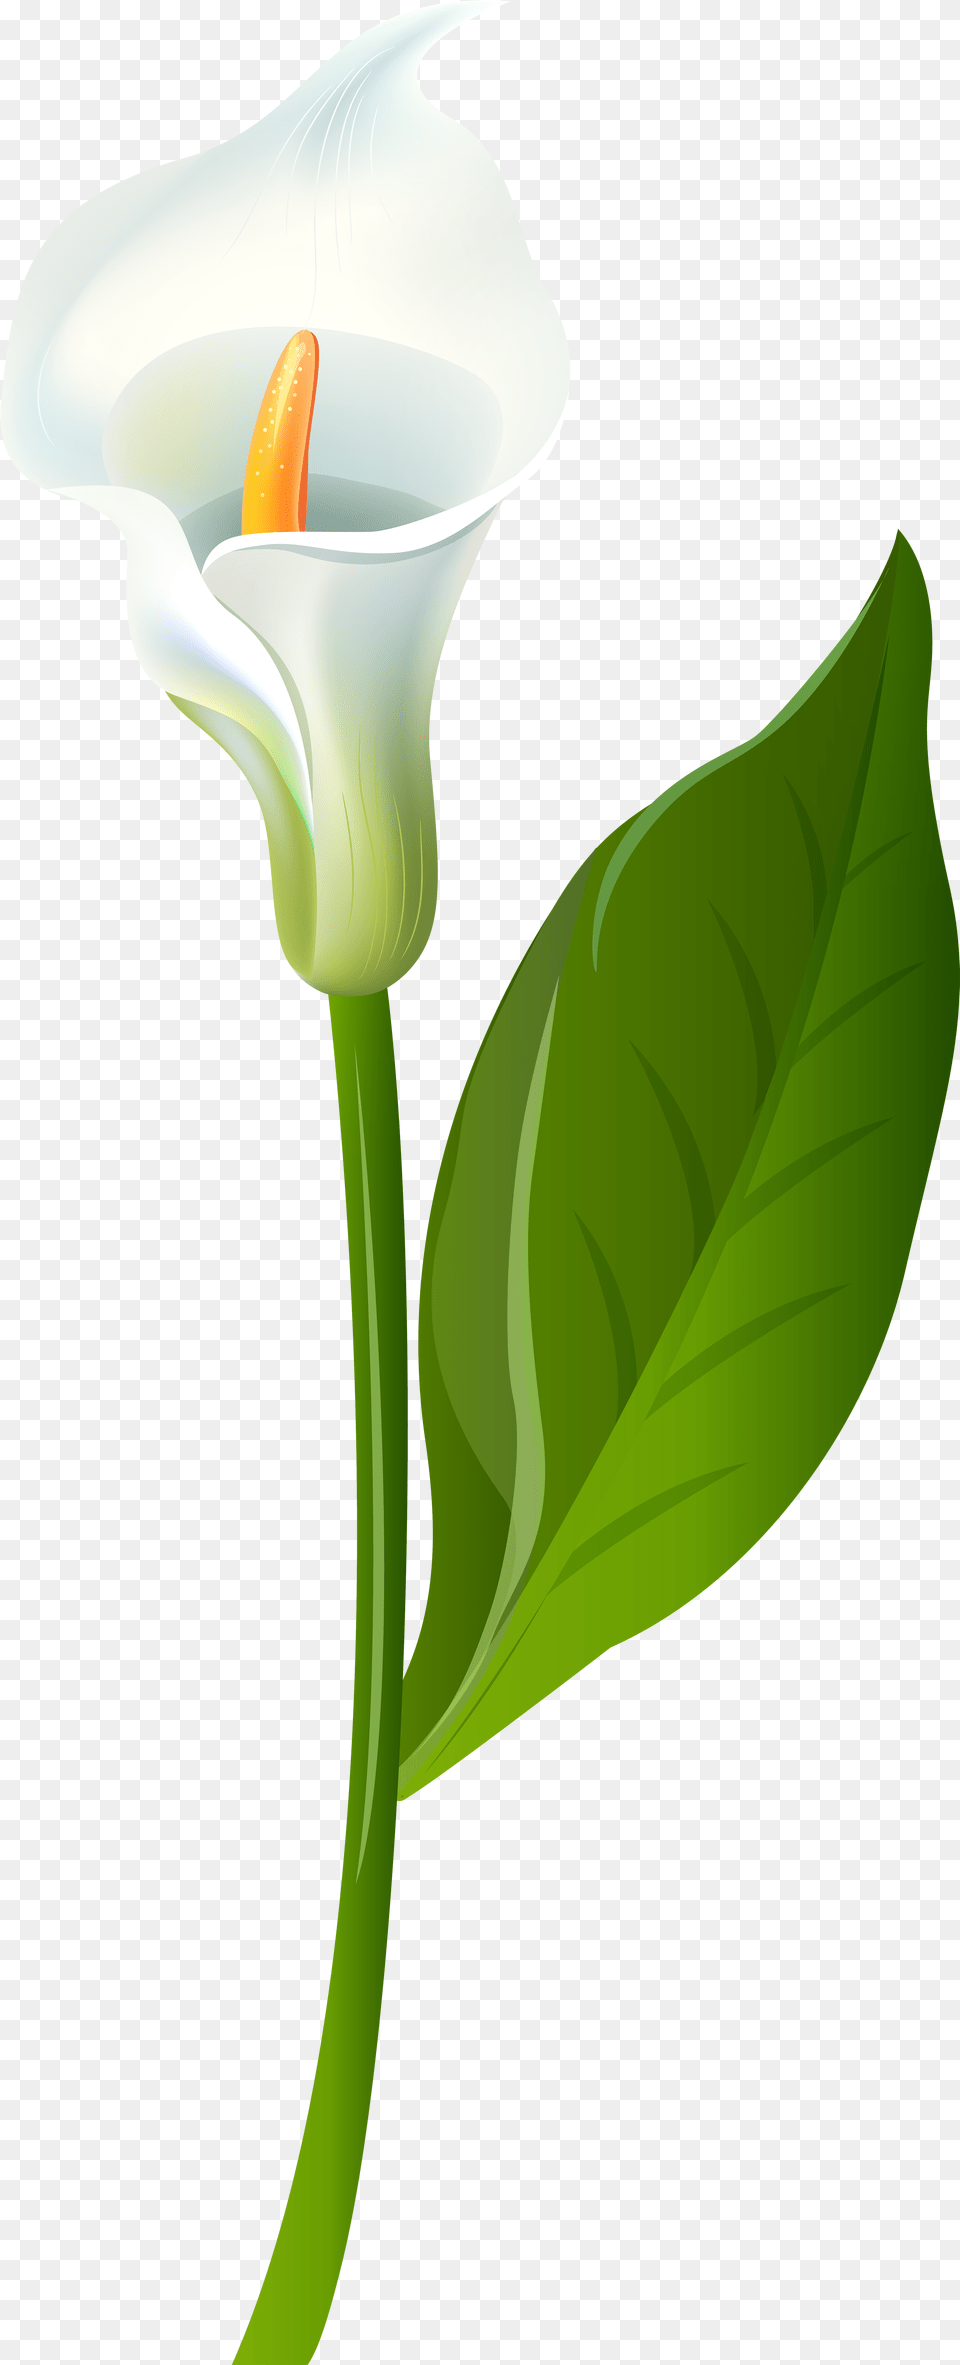 Leaf Flower Plant Stem Green Calla Lily Lily Flower White Calla, Araceae Png